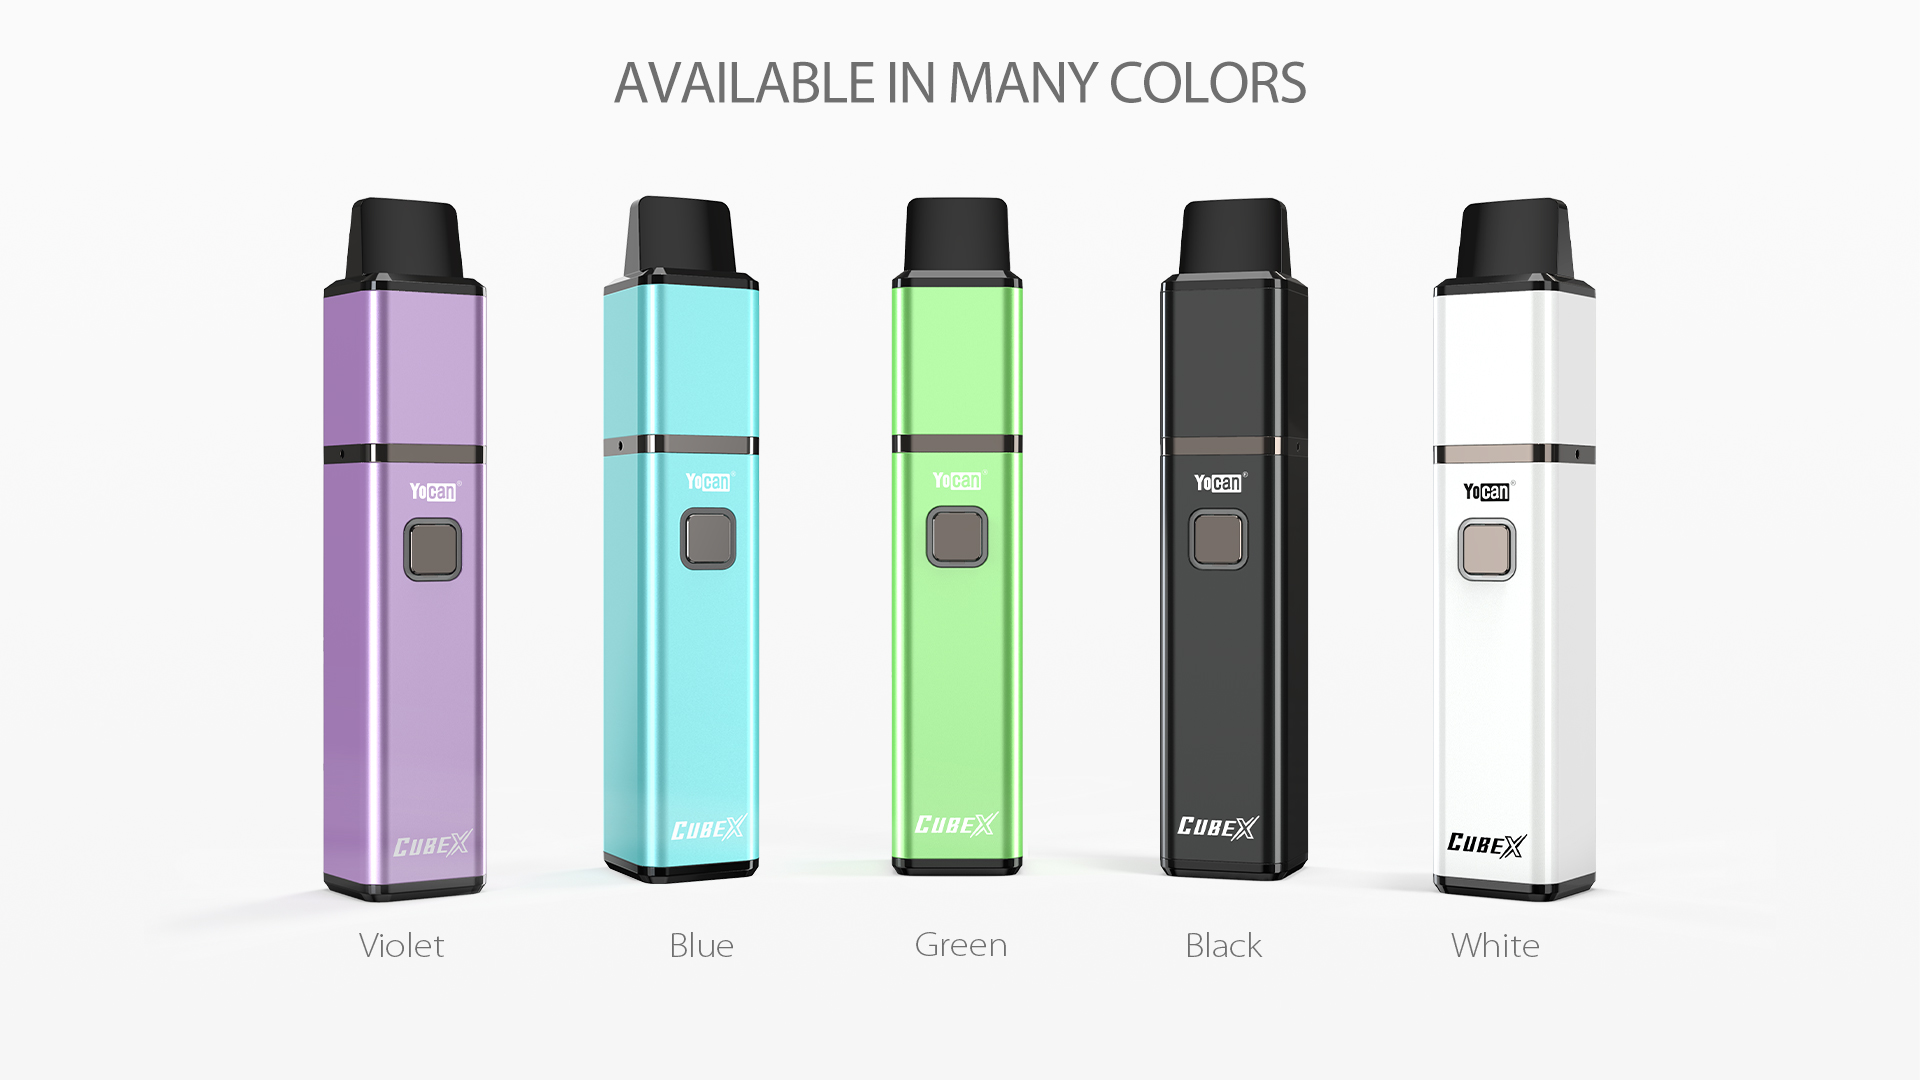 Yocan Cubex available in many colors